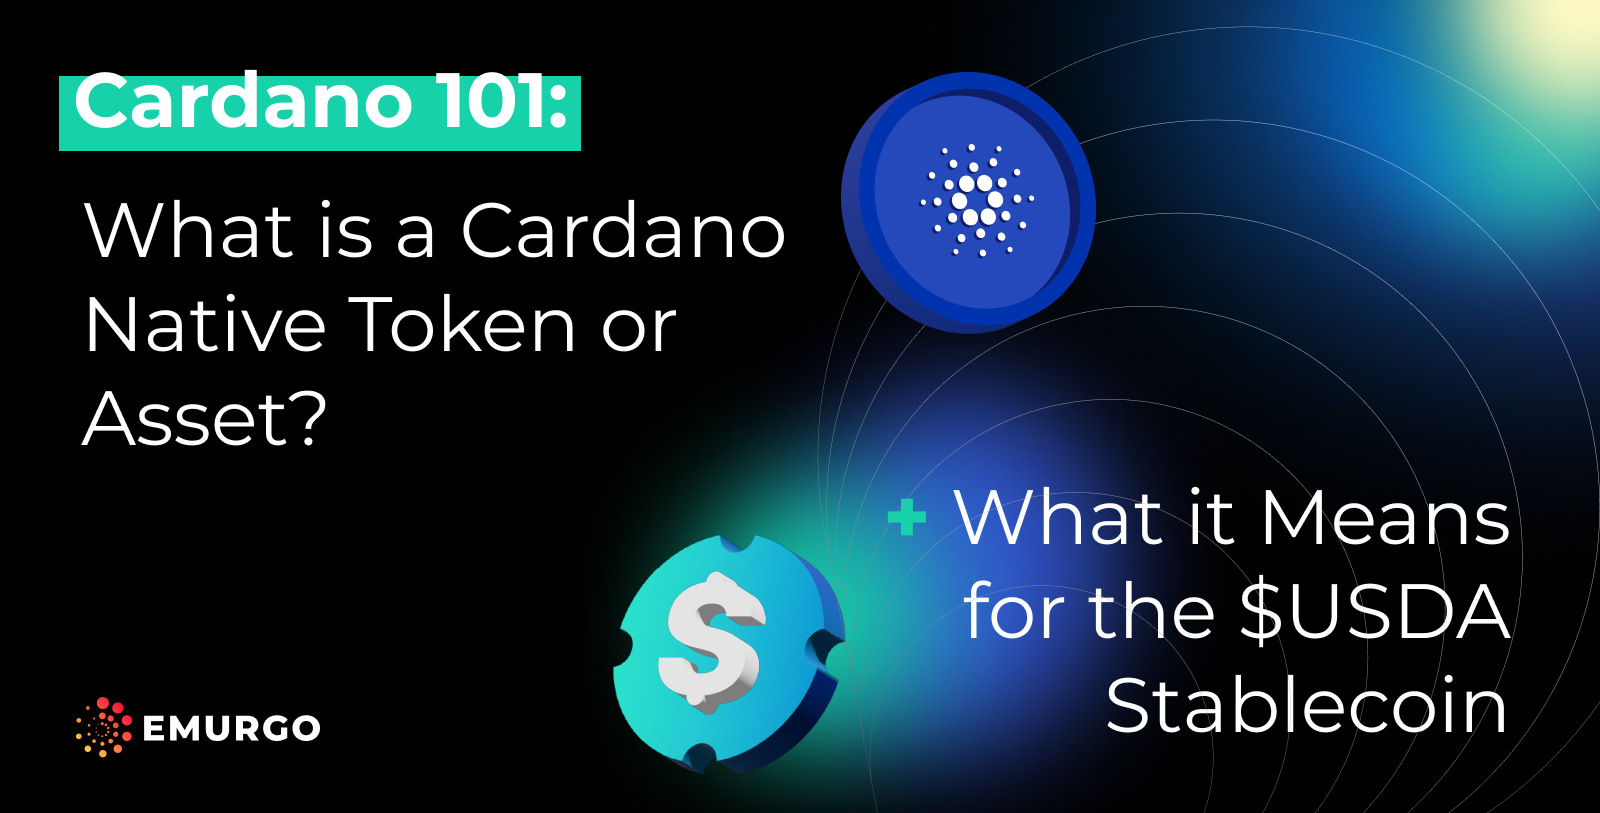 Cardano-101-What-is-a-Cardano-Native-Token-Asset-USDA-Stablecoin.png